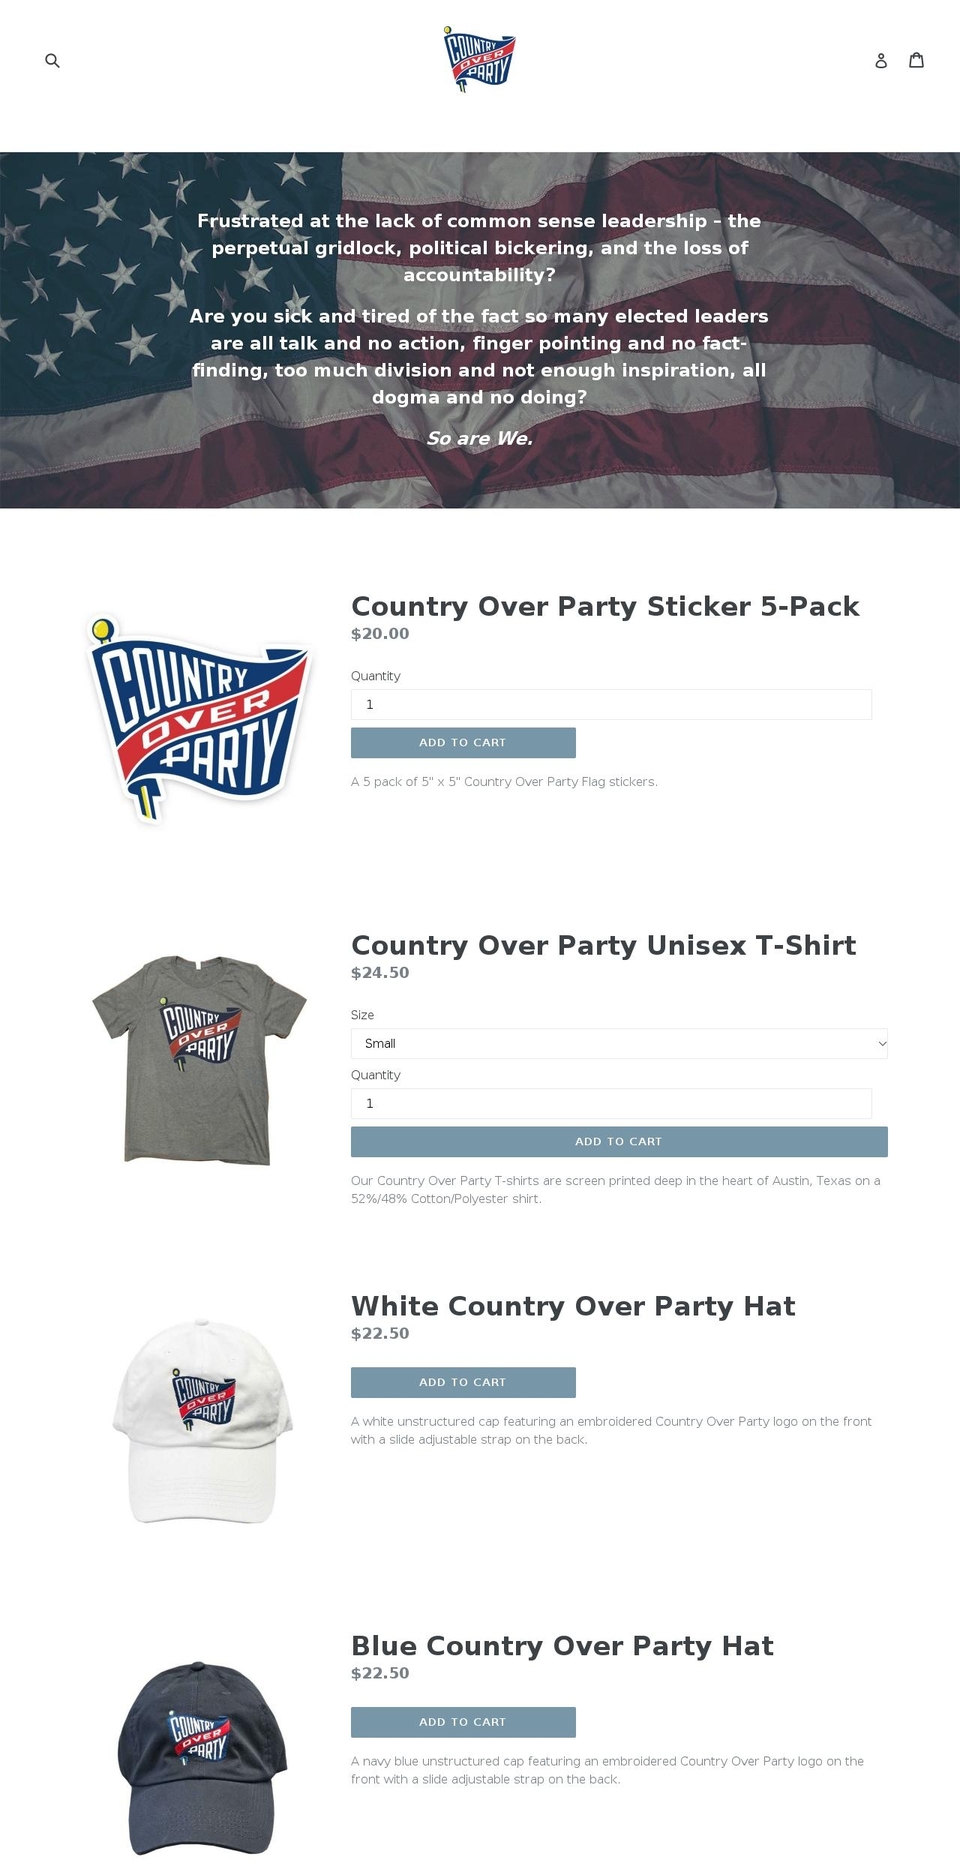 countryover.party shopify website screenshot